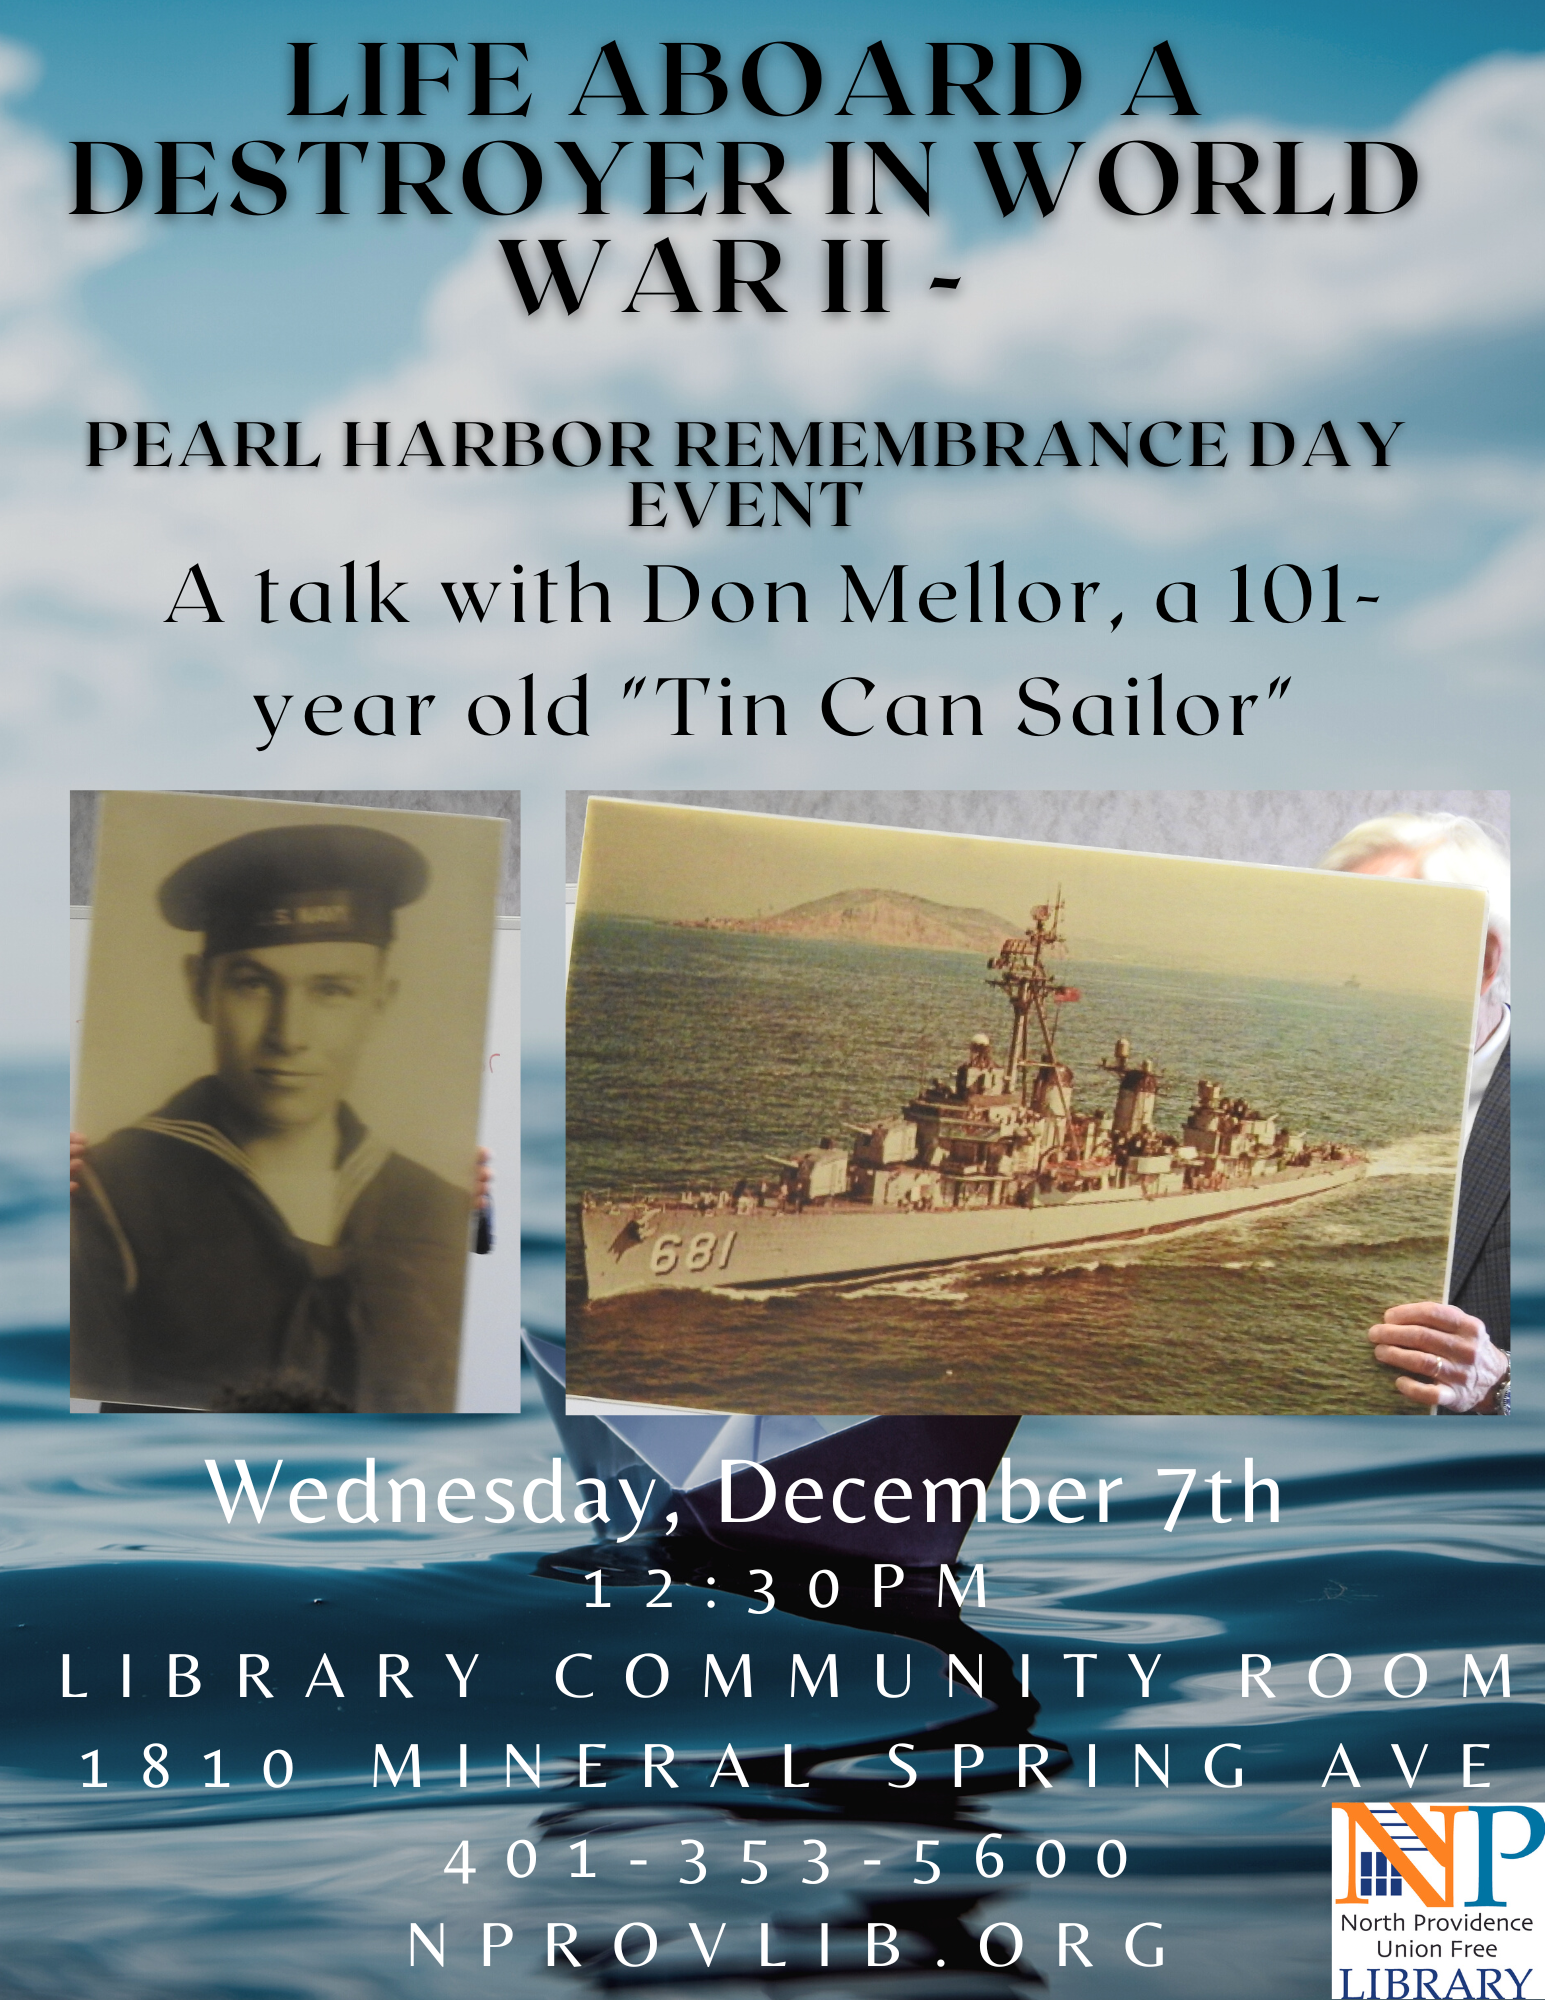 Life Aboard a Destroyer in World War 2- Pearl Harbor Remembrance Day Event. A talk with Don Mellor, a 101-year-old Tin Can Sailor